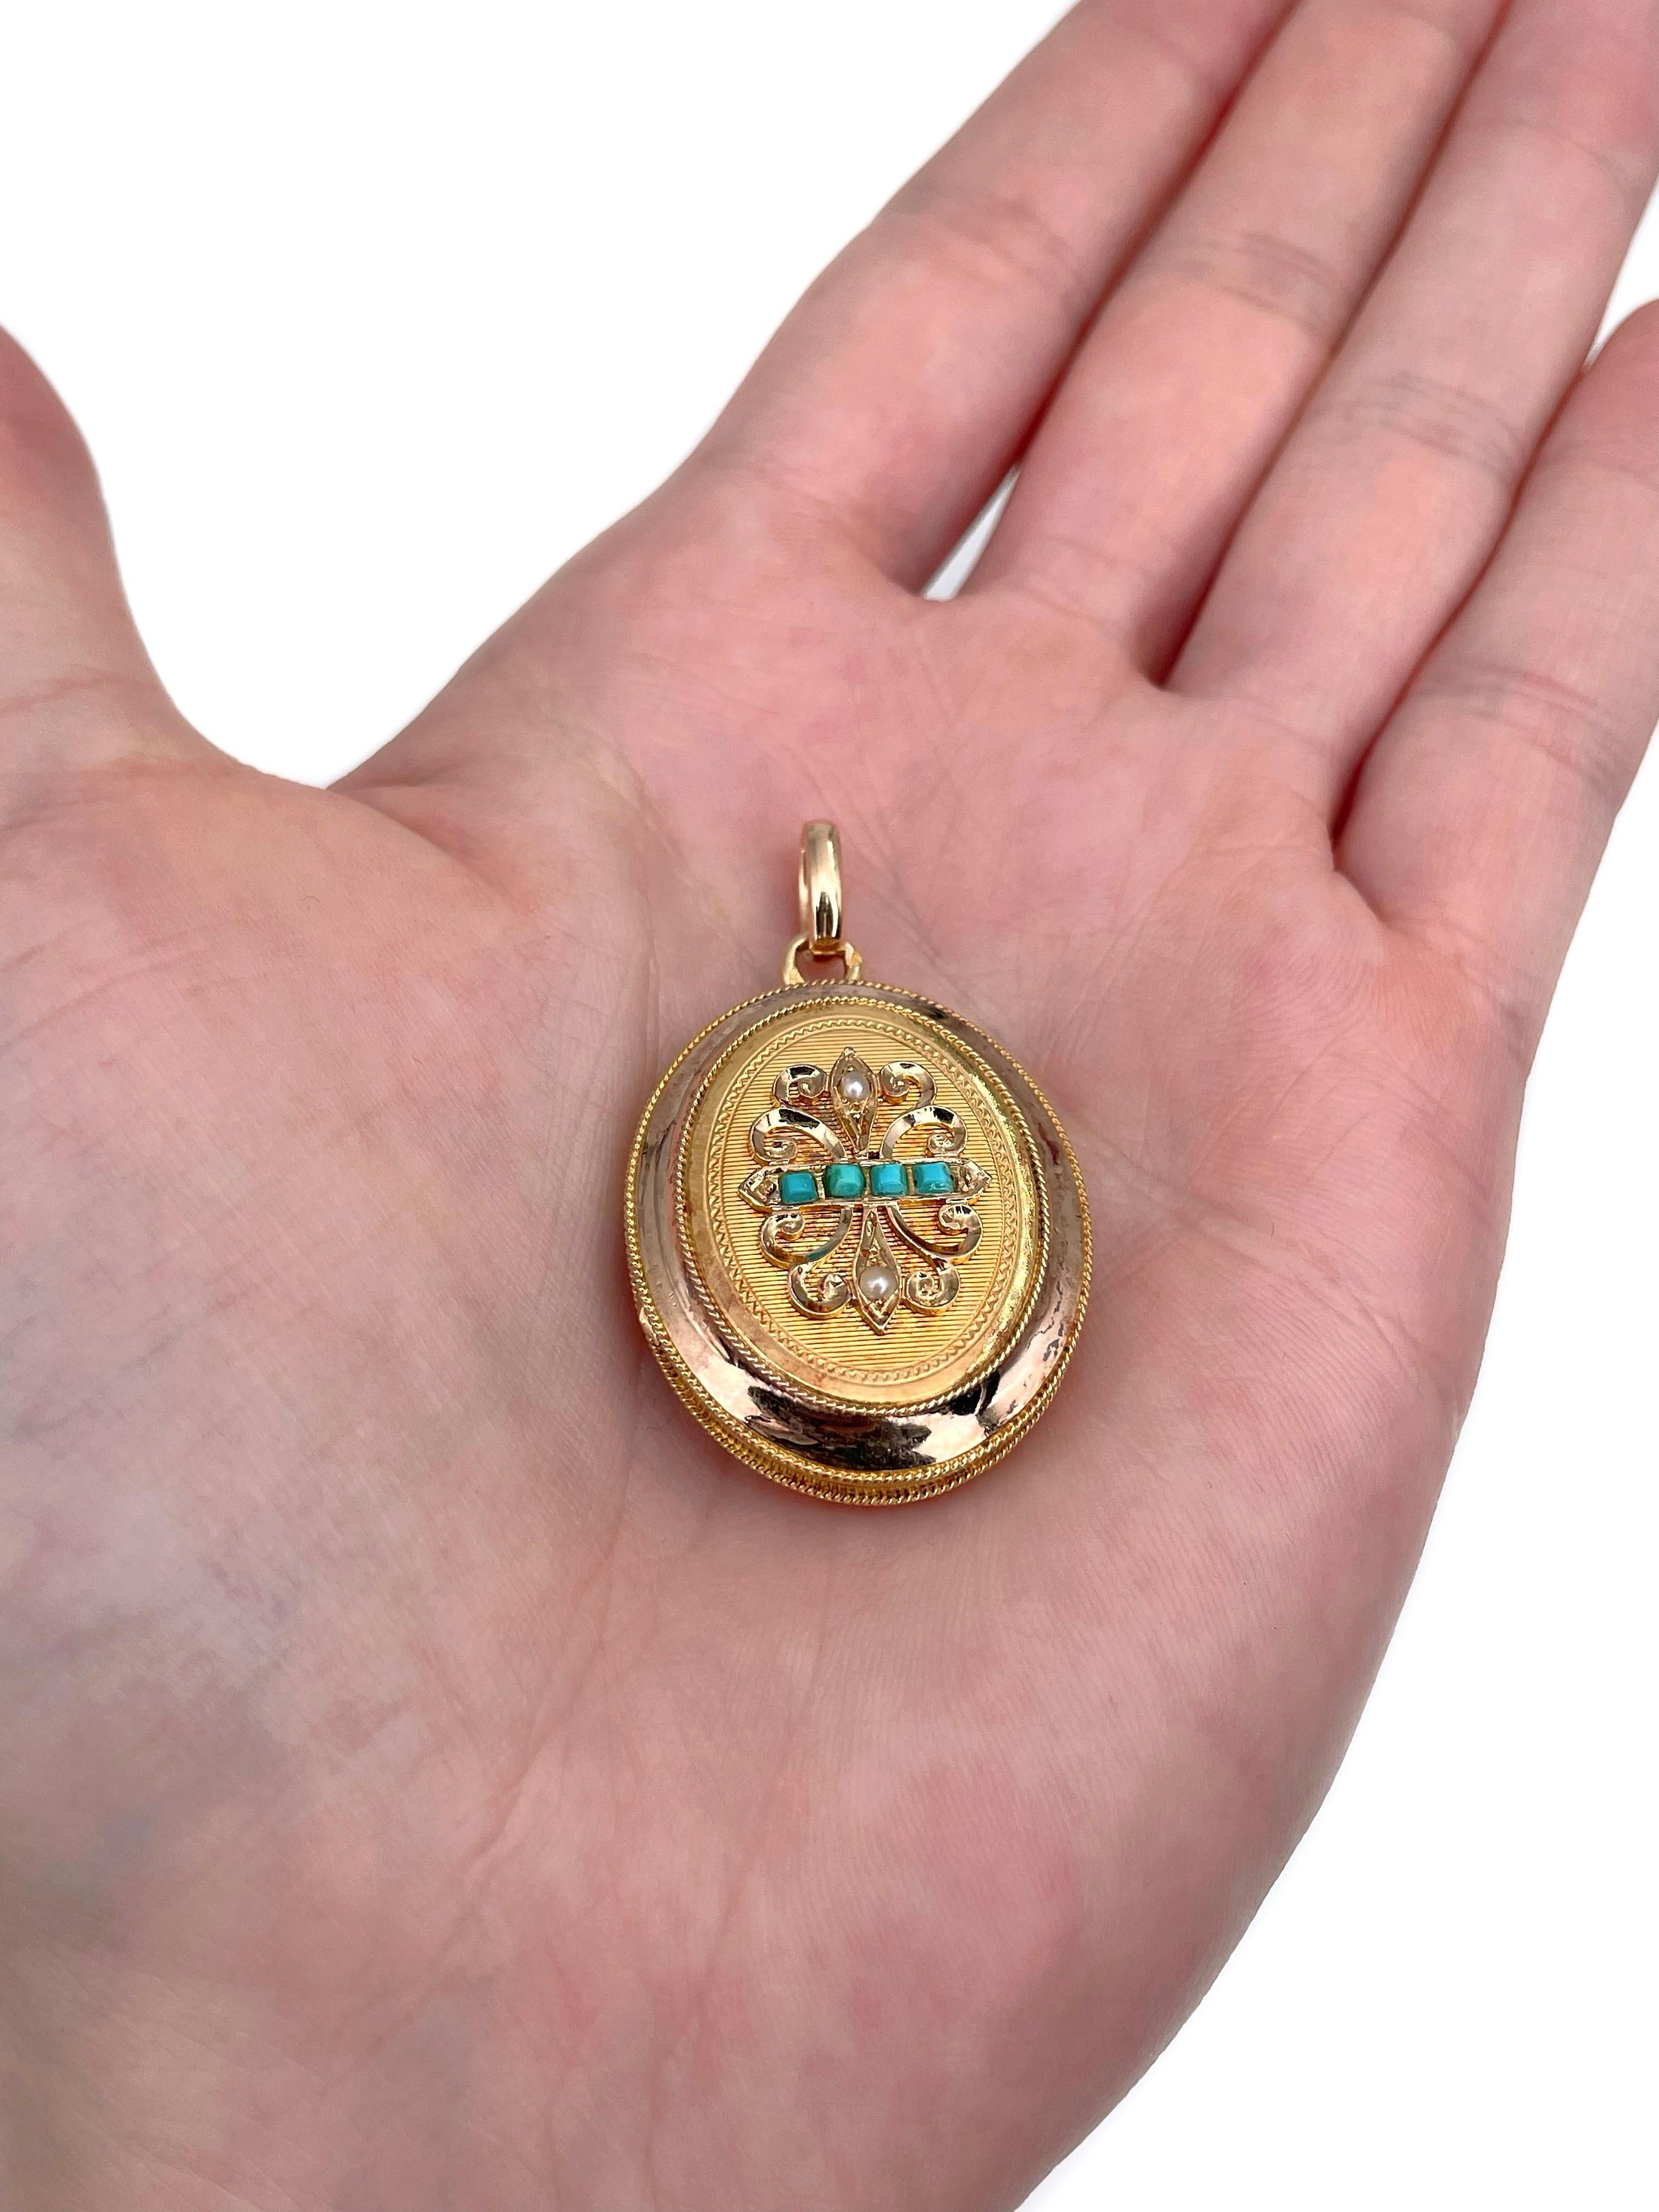 This is a Victorian oval locket pendant crafted in 18K yellow and rose gold. Circa 1890. 

The piece features turquoises and seed pearls. 

The locket contains a glass cover inside. 

Weight: 10.23g
Size: 4.2x2.5cm

———

If you have any questions,